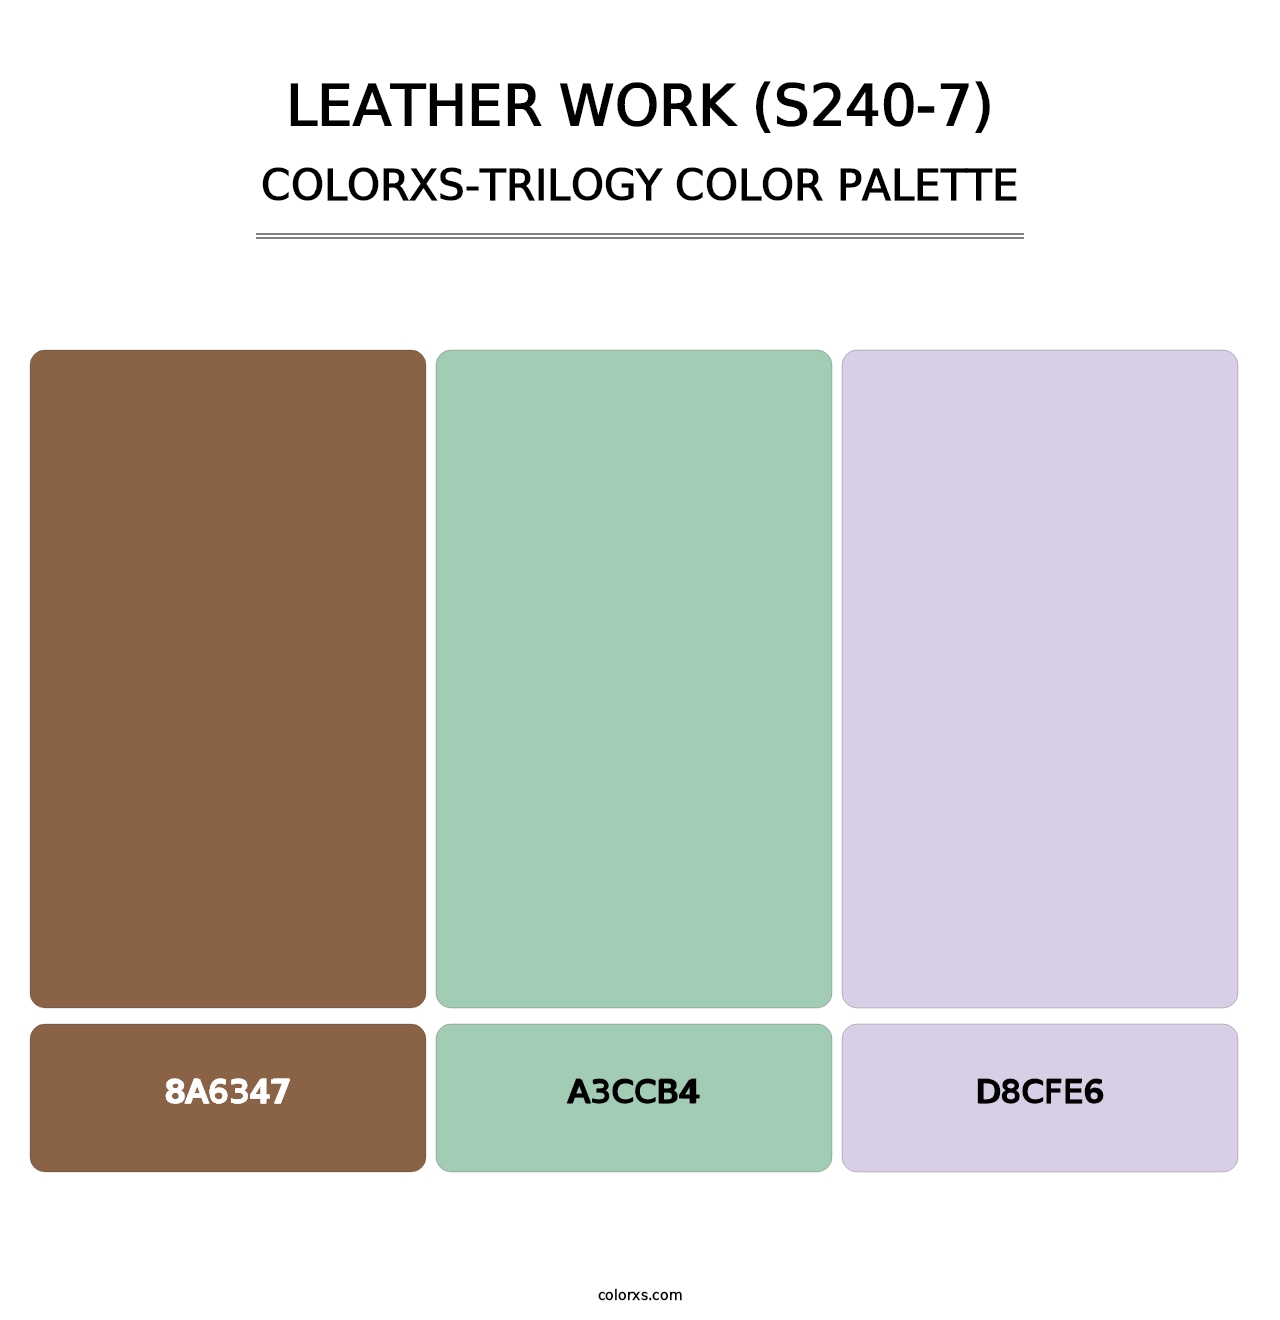 Leather Work (S240-7) - Colorxs Trilogy Palette